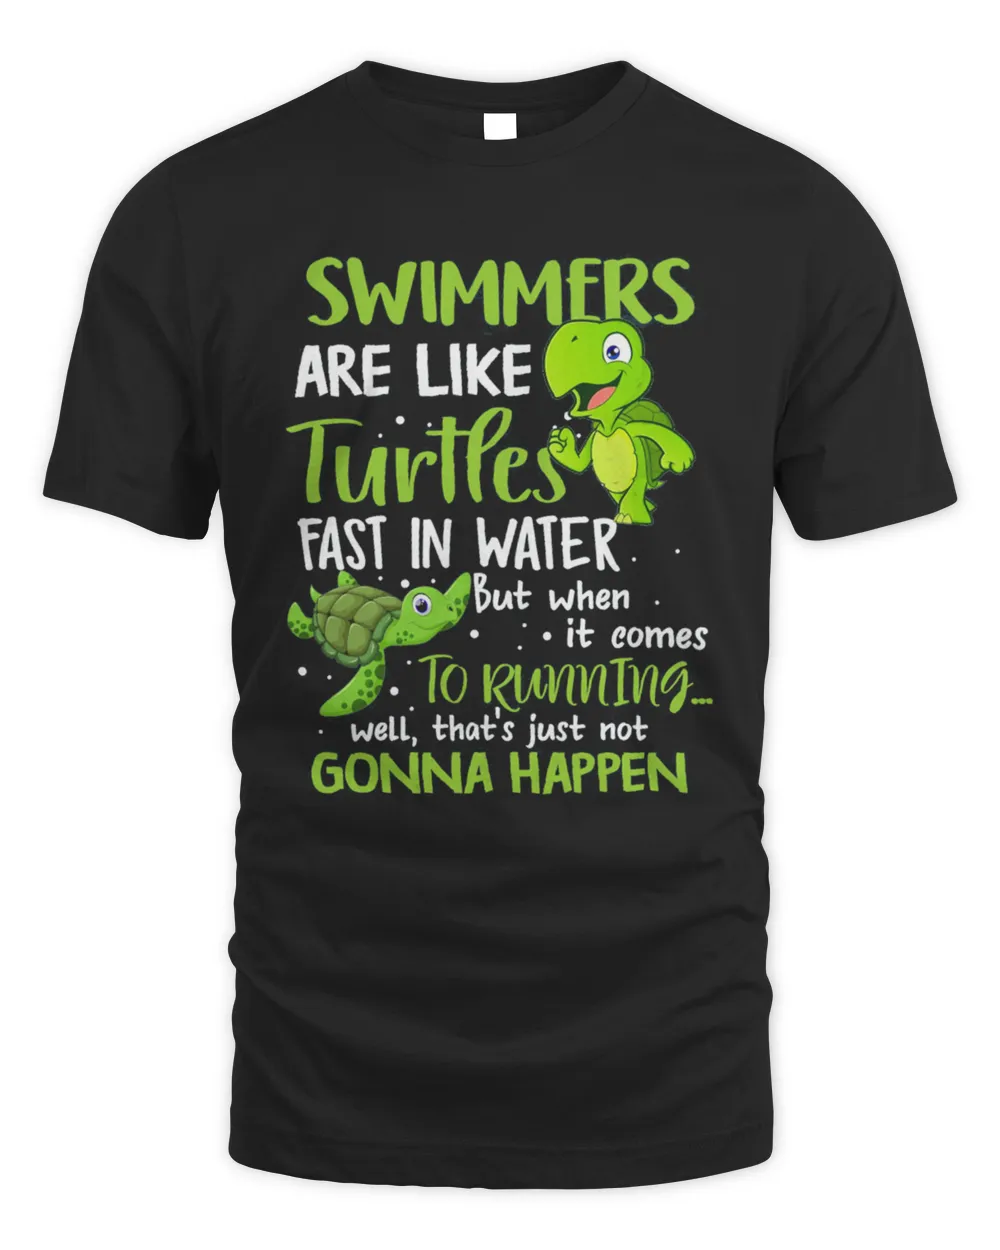 Swimmers Are Like Turtles Fast In Water Shirt